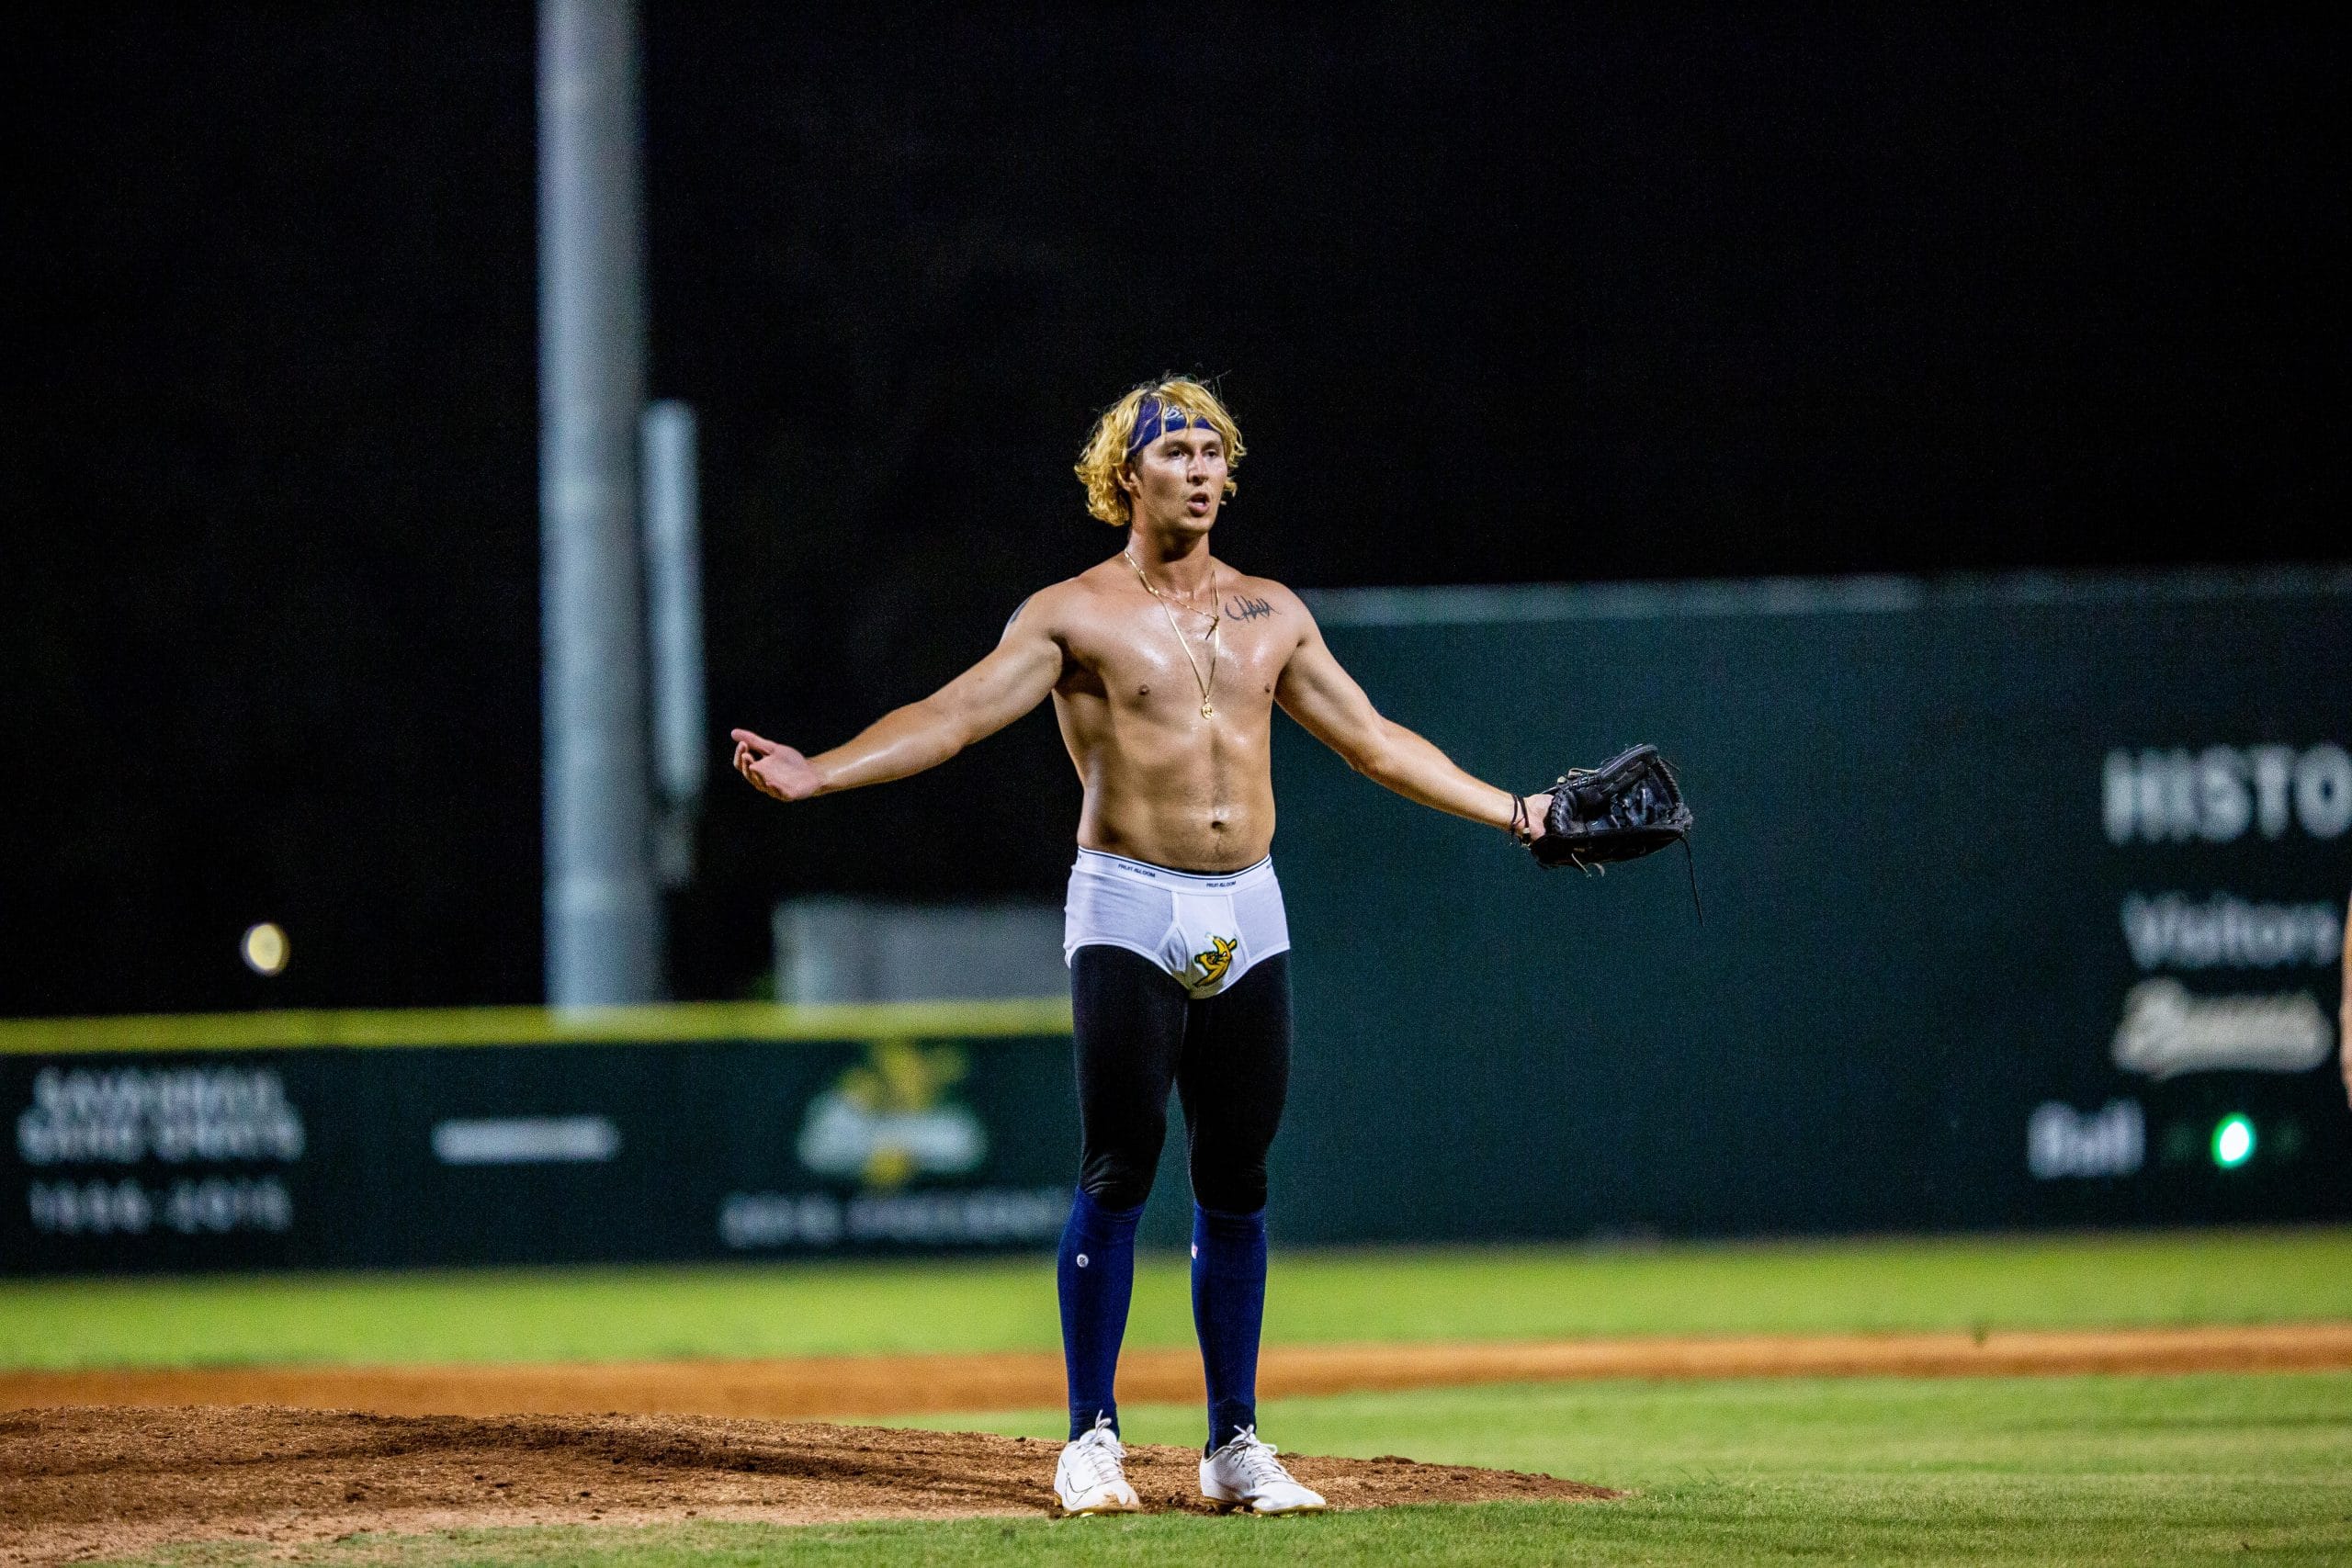 Baseball Player Pitches in his Underwear with Ric Flair Impression - The  Savannah Bananas